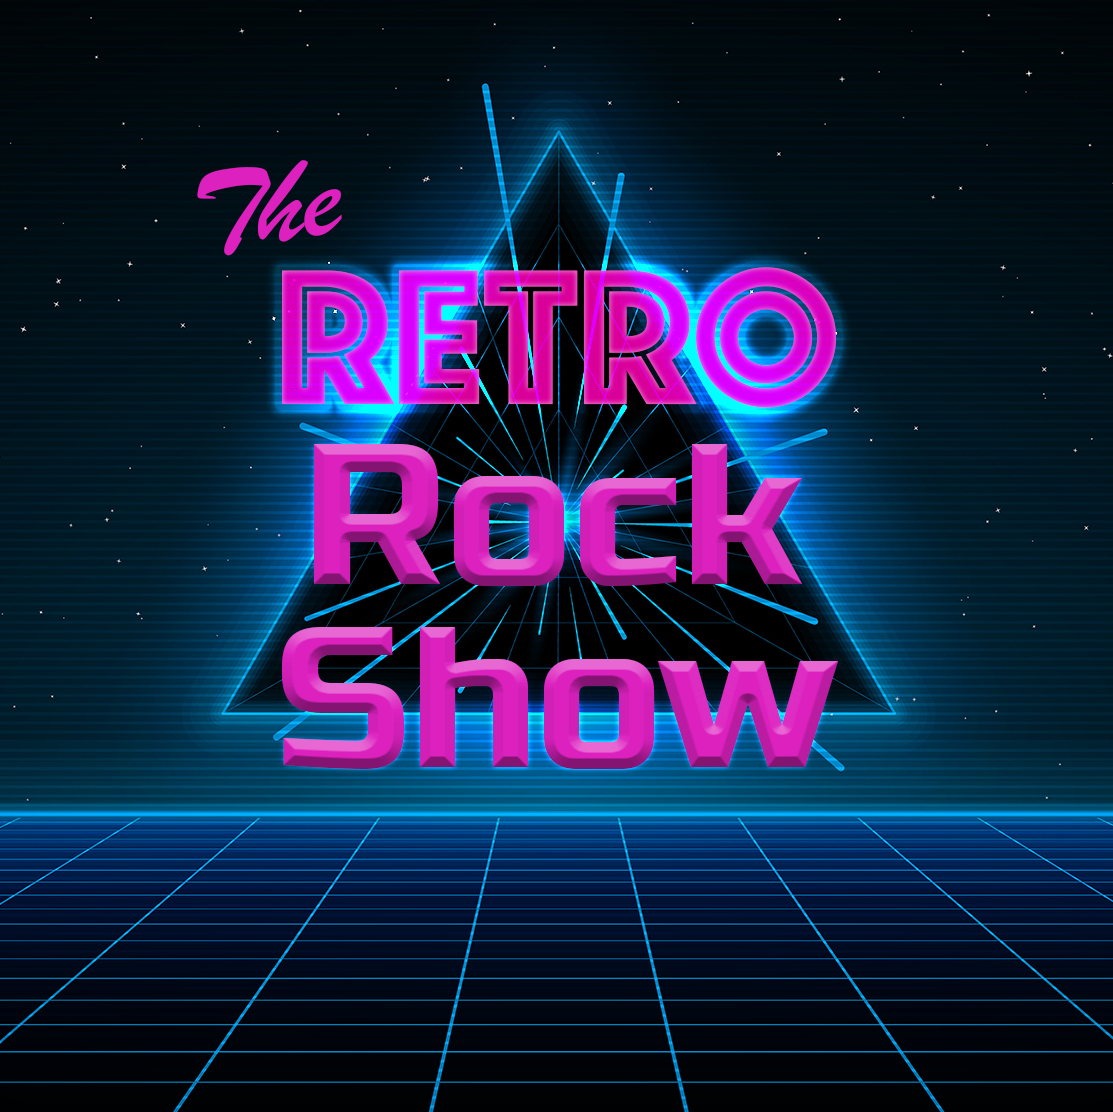 The Retro Rock Show on 27 October 2022